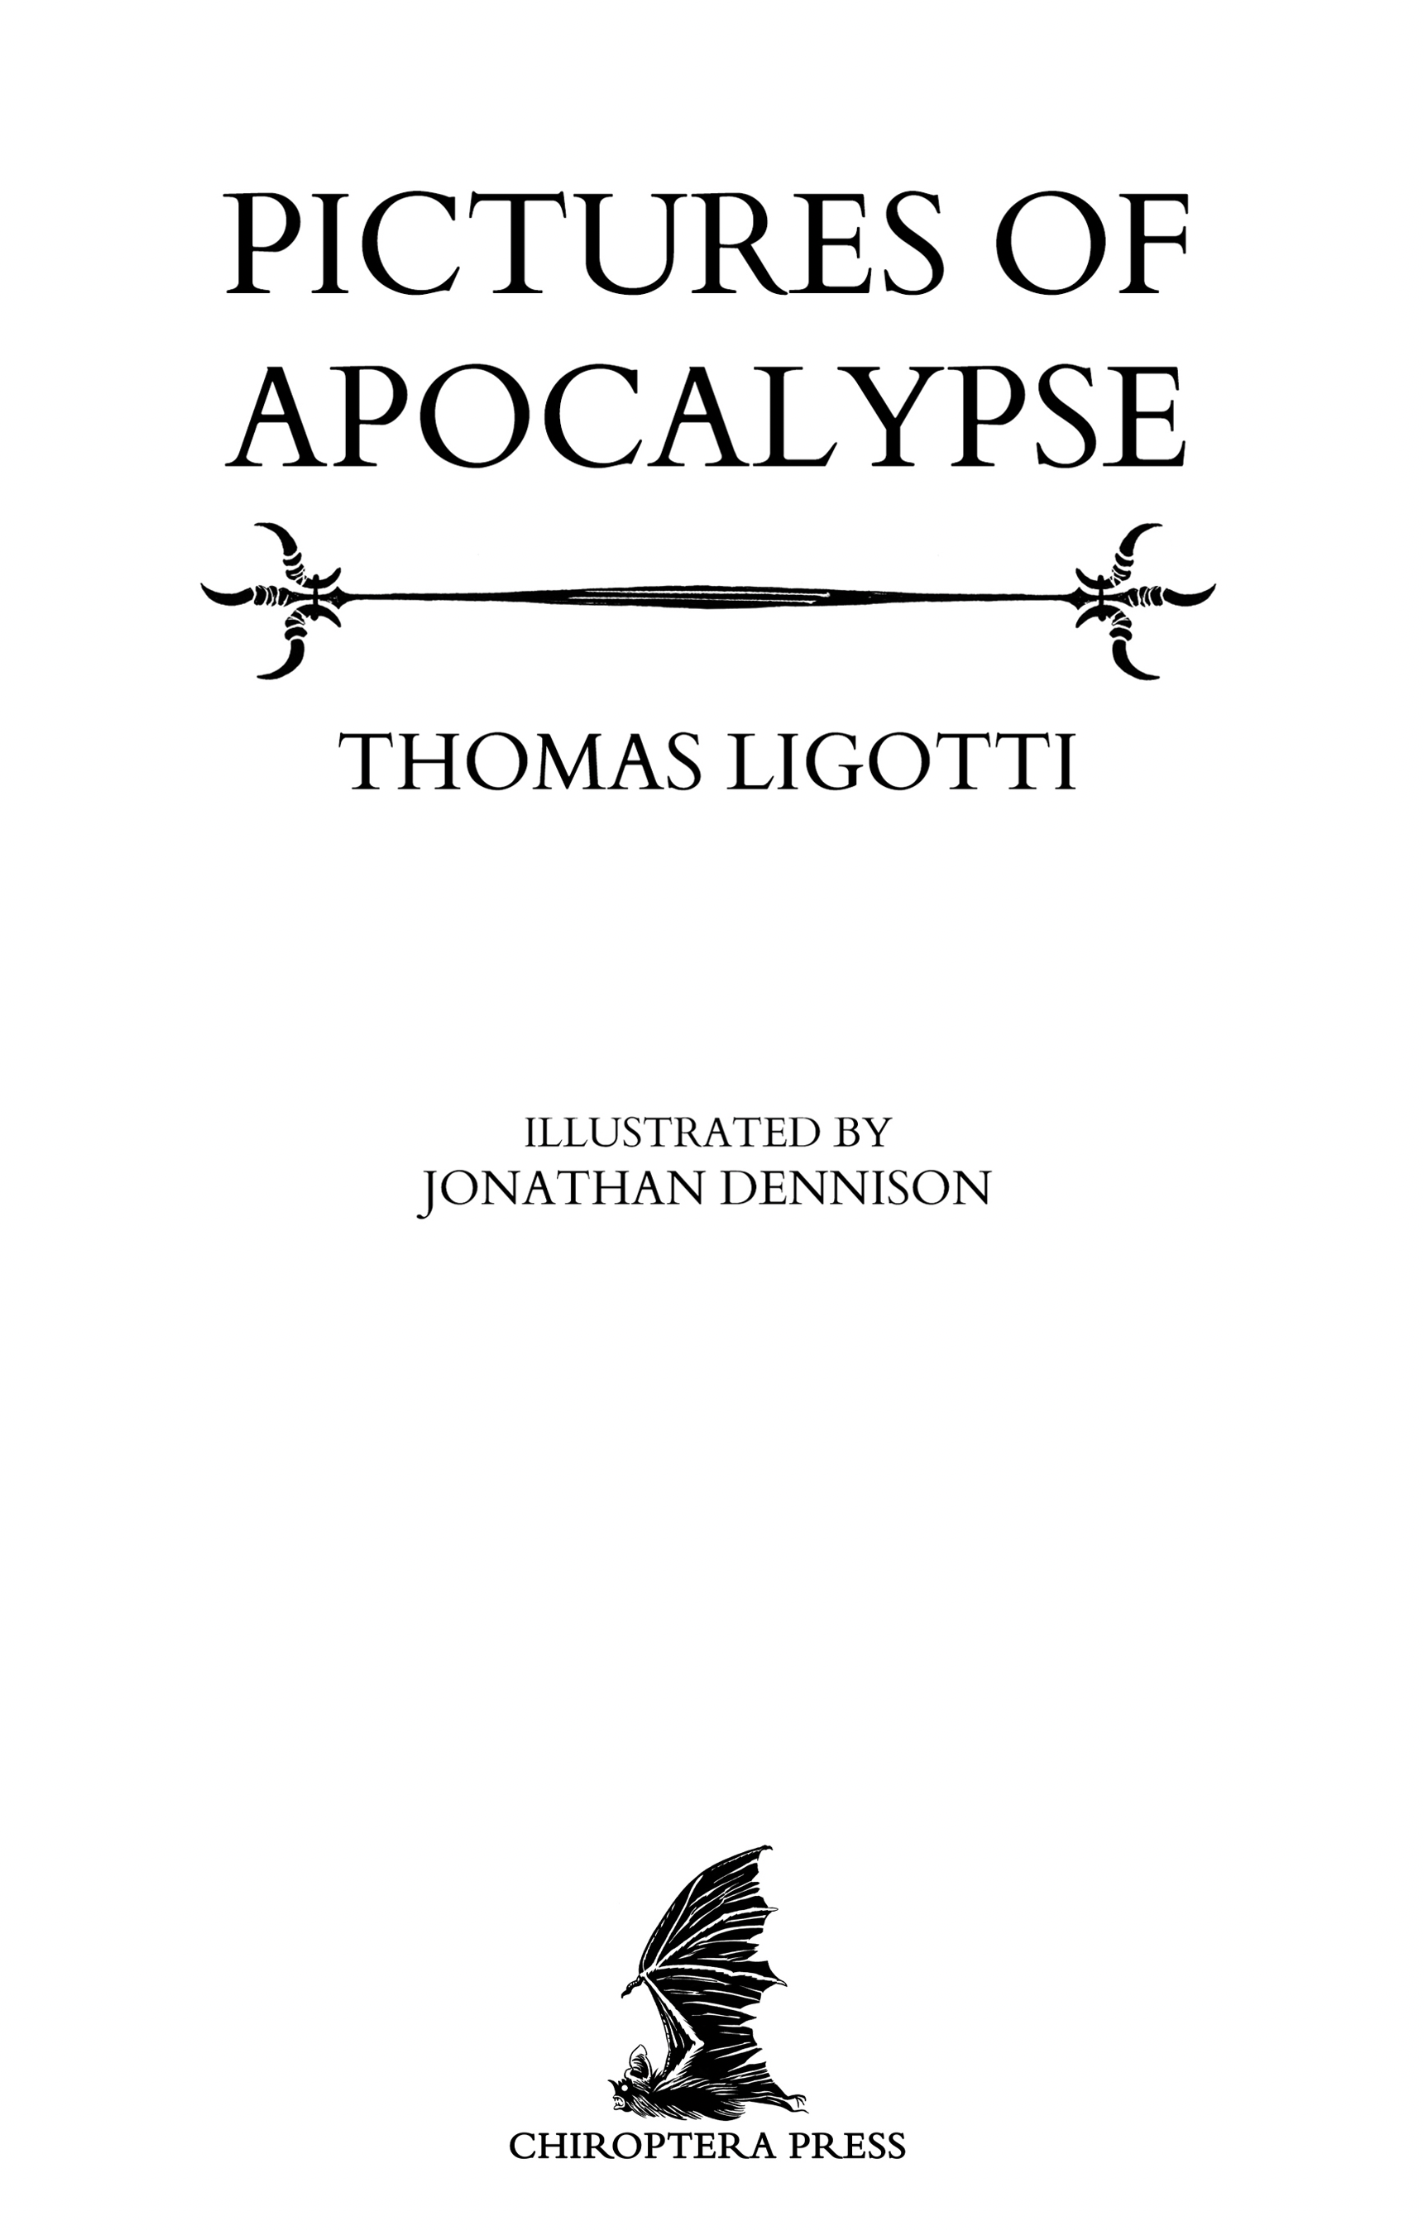 Pictures of Apocalypse by Thomas Ligotti - Signed and numbered slipcased edition